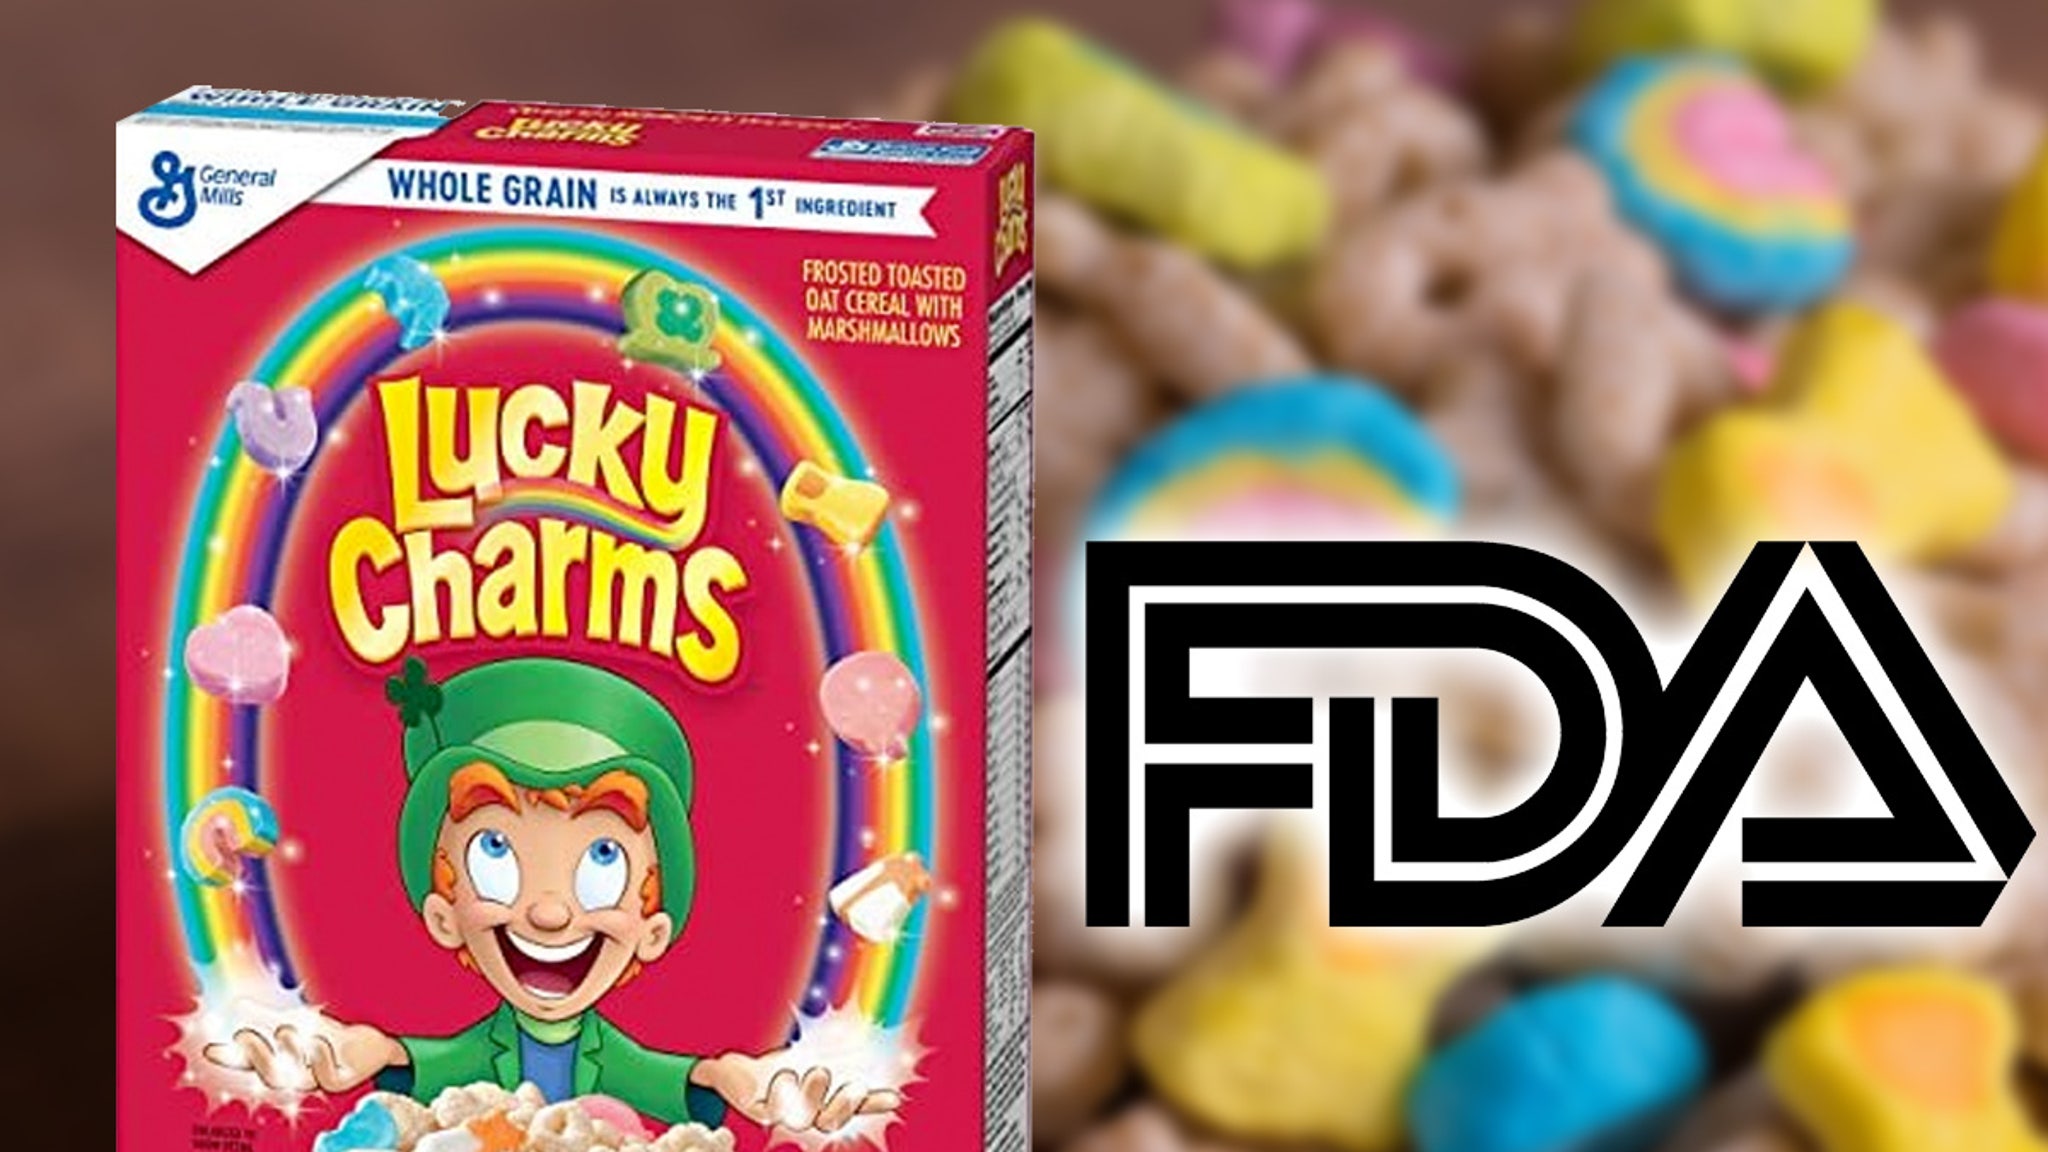 Cereal Lucky Charms®